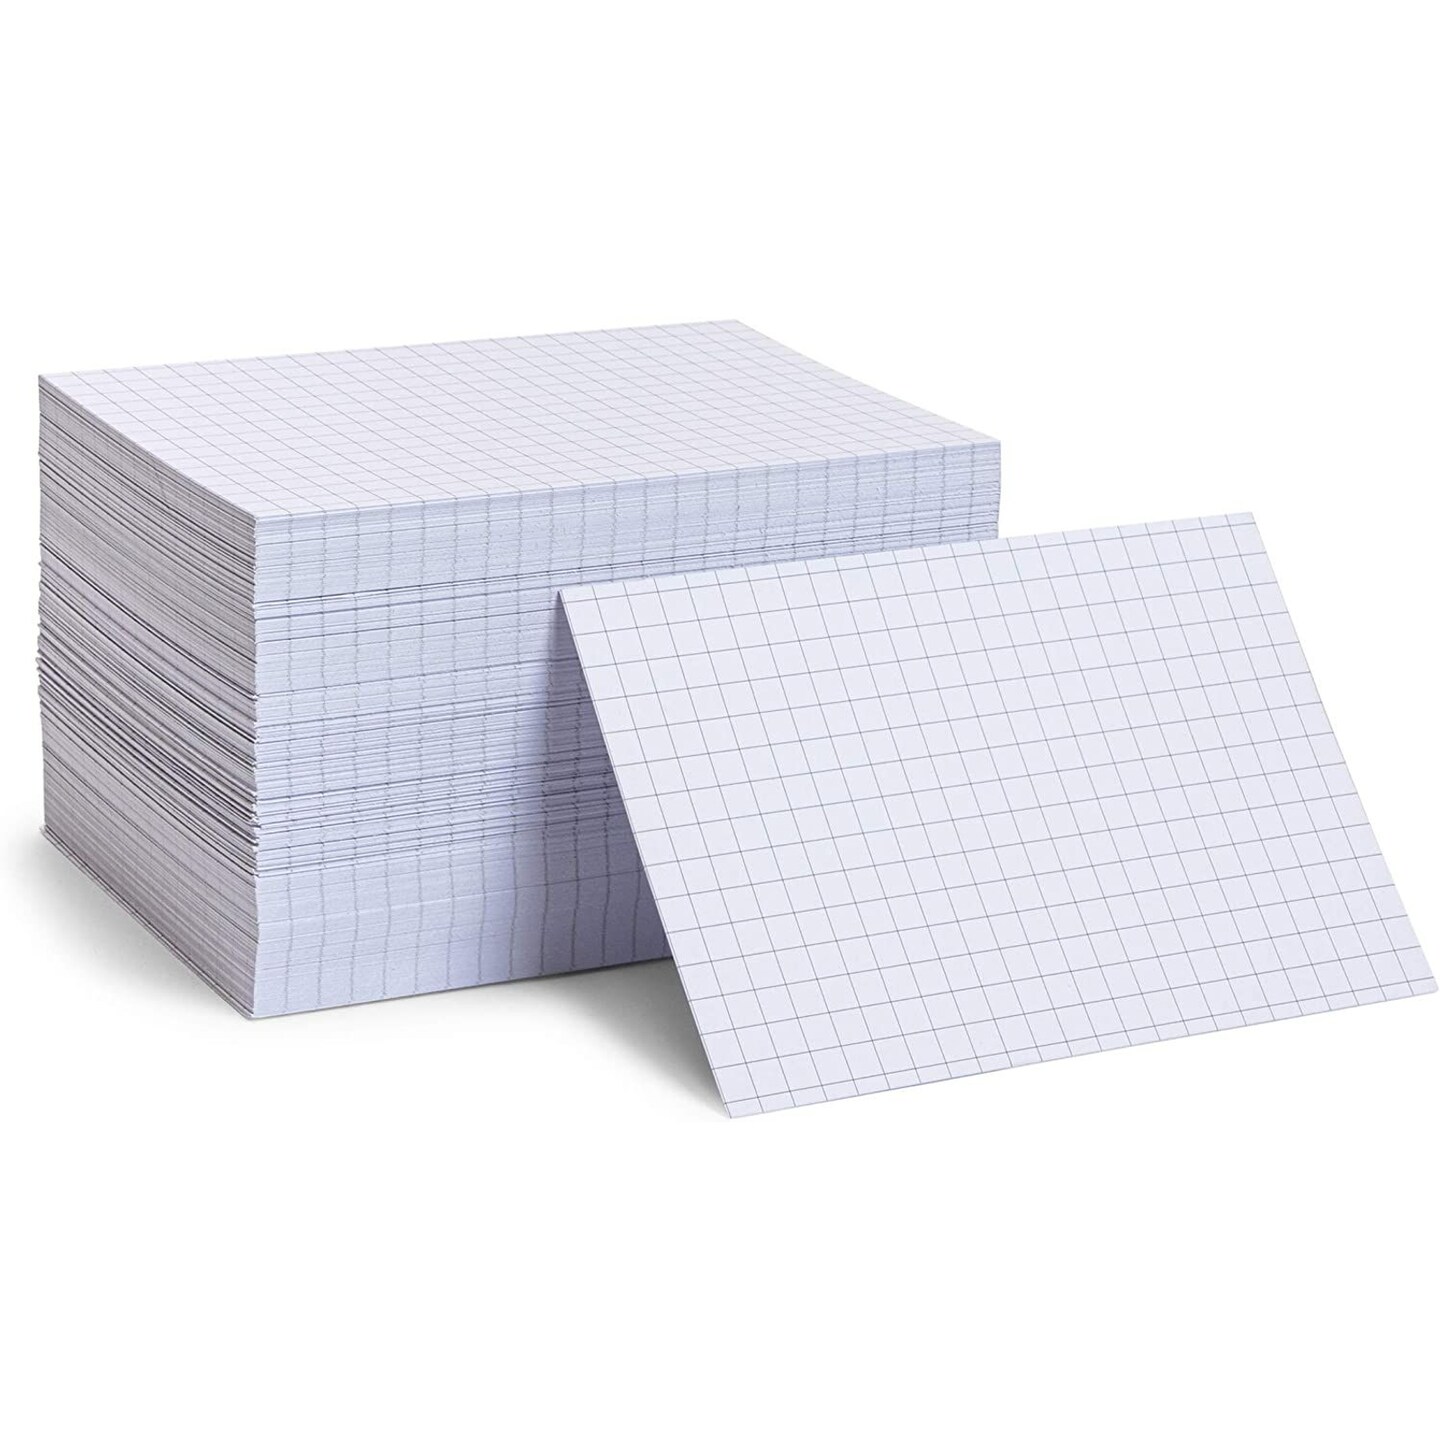 4X6 Ruled Index Cards (White)